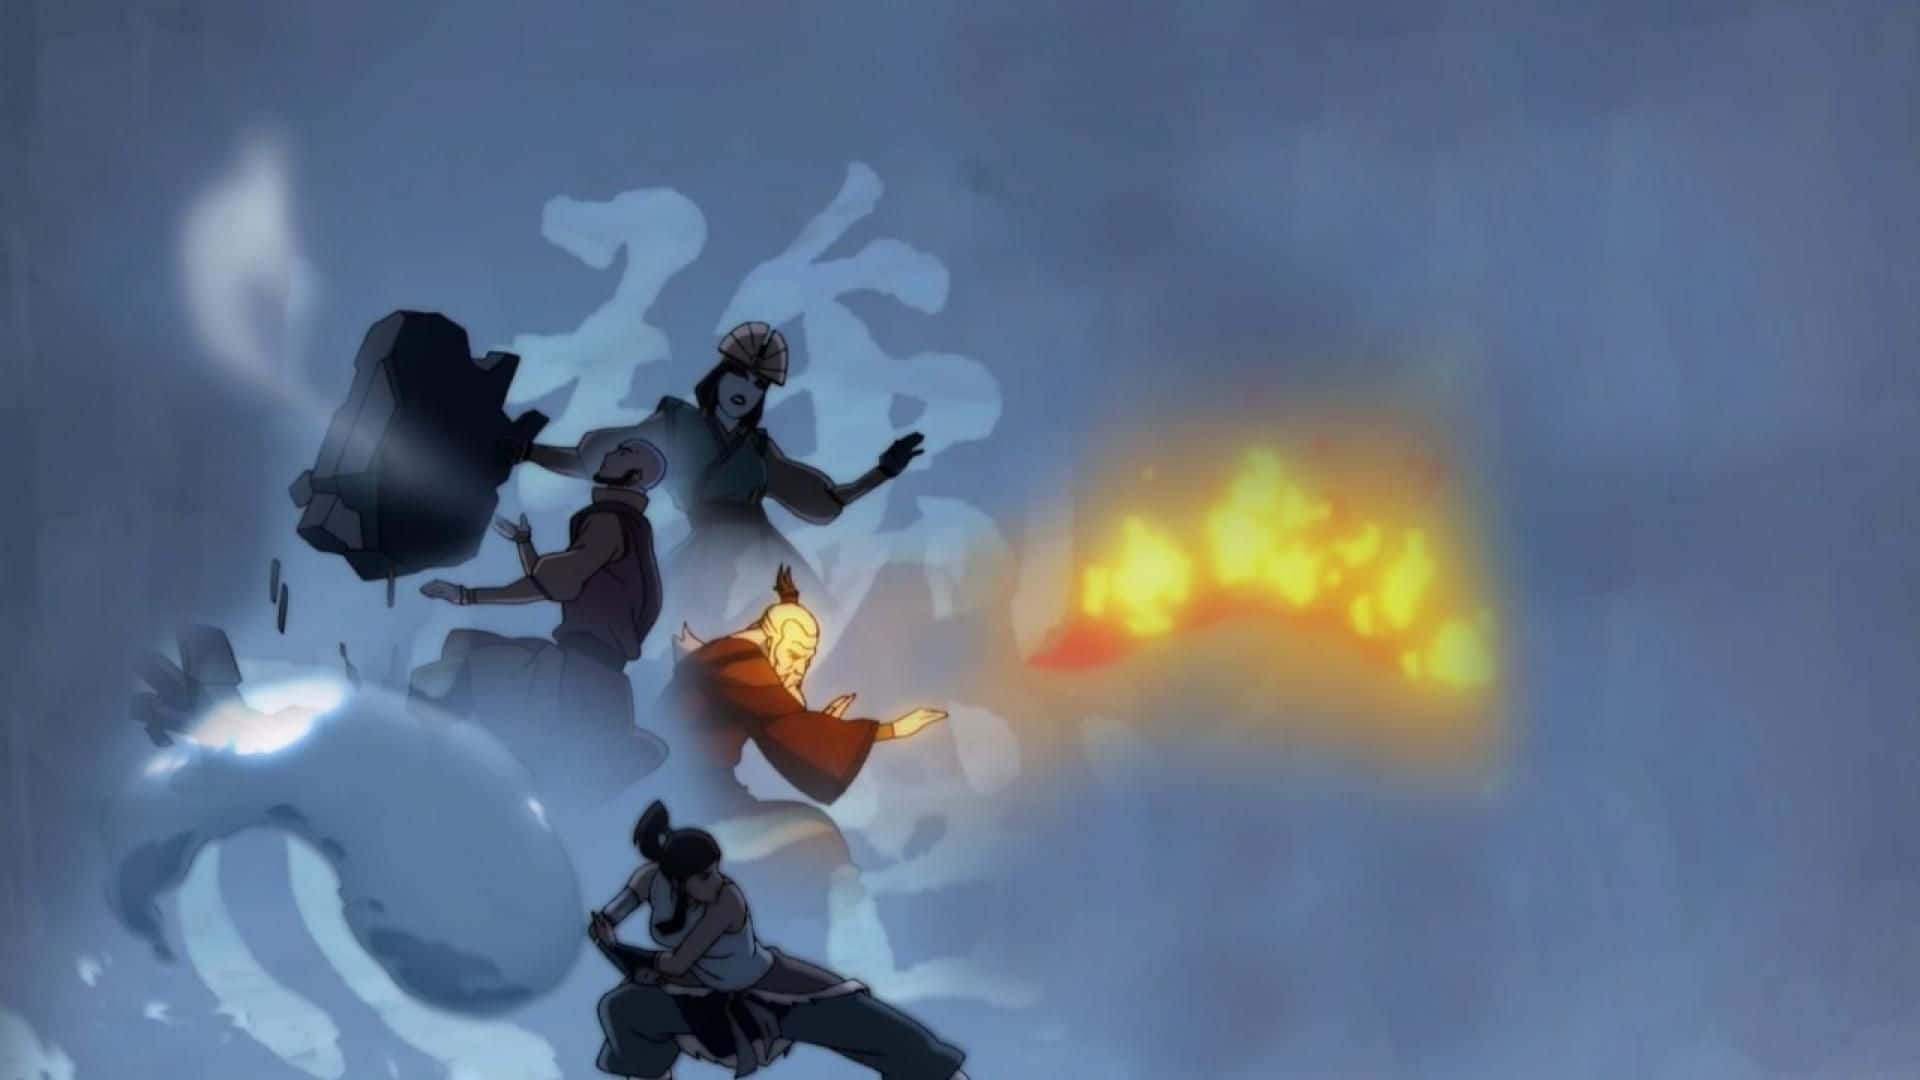 Korra Unleashes Her Full Potential And Avatar Power To Protect Her Kingdom.